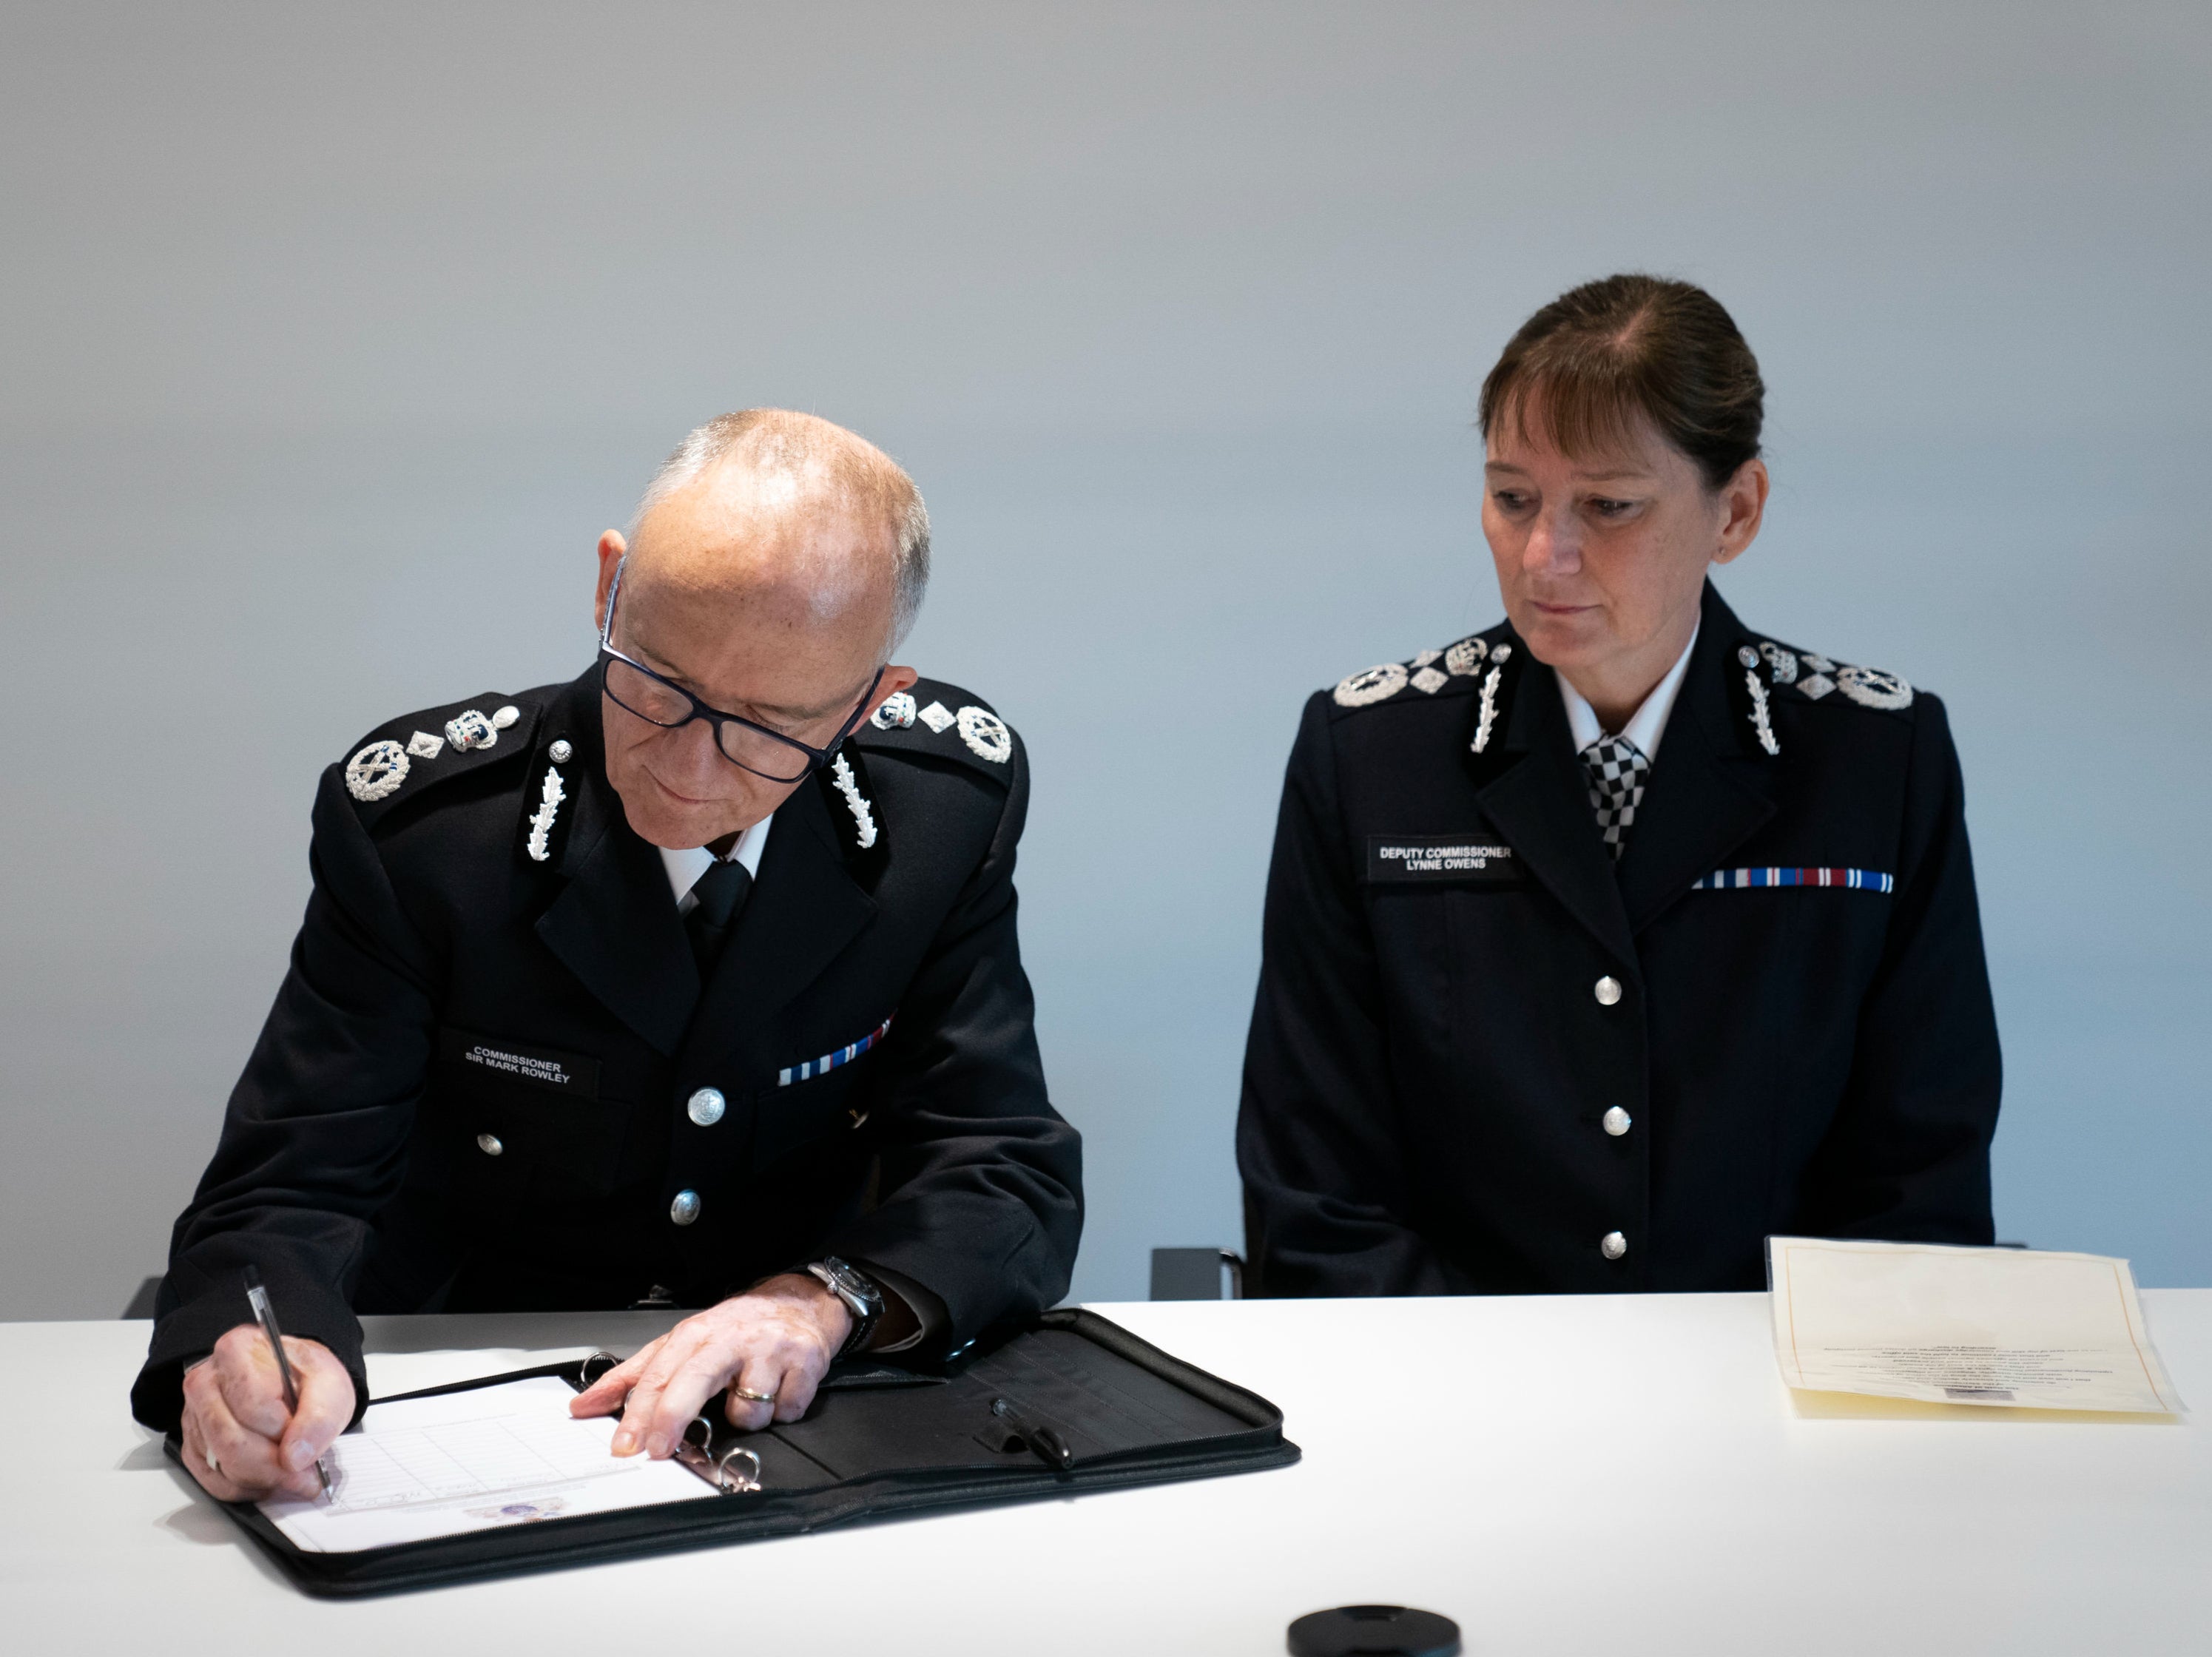 Sir Mark Rowley (left) and Deputy Commissioner Lynne Owens sign the Warrant Register at New Scotland Yard in central London on 12 September 2022